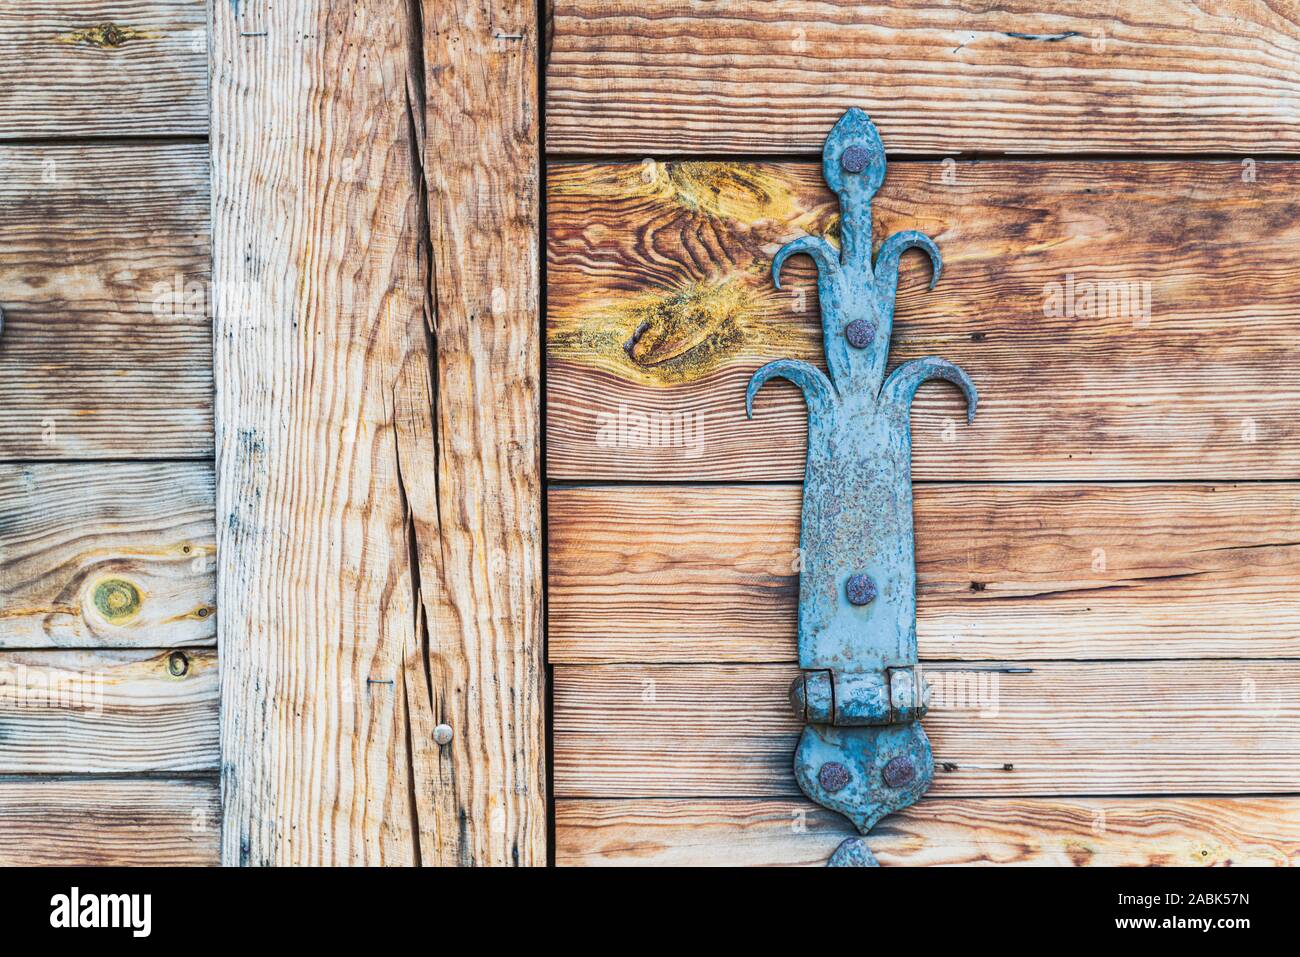 Fragment of wooden window shutters of wood house with vintage metal furniture, close up, horizontal image Stock Photo